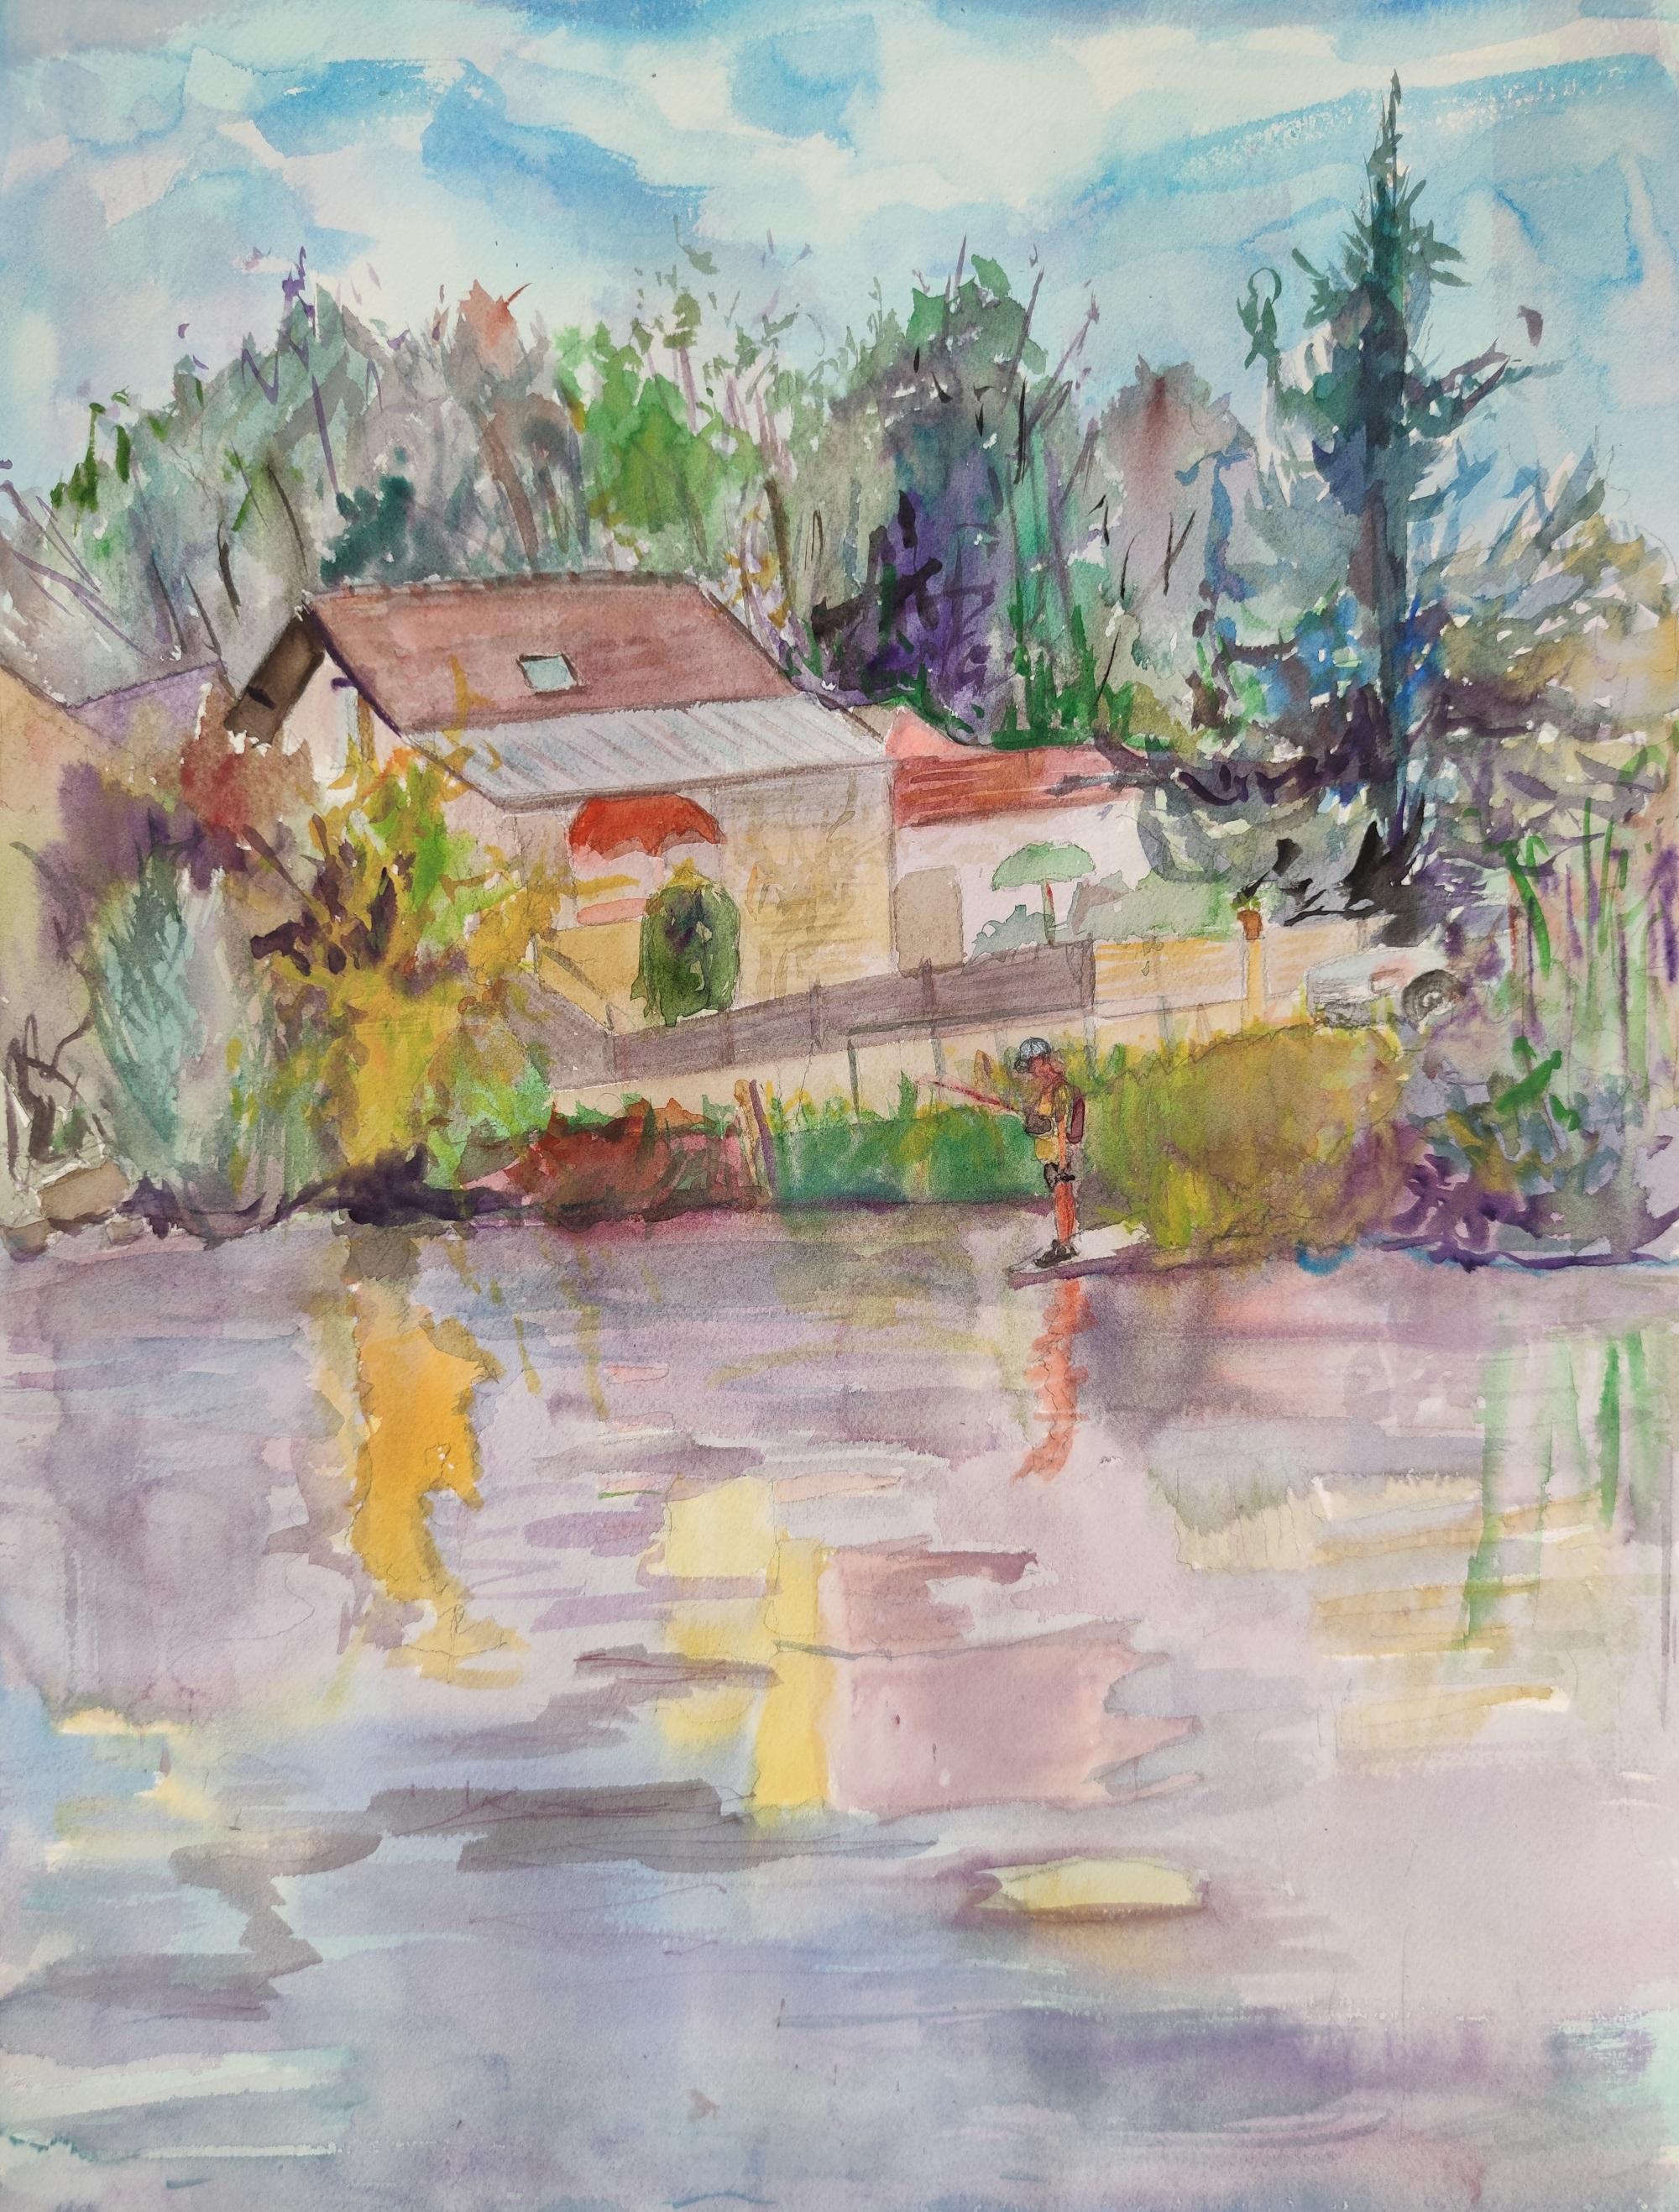 🎨 Painting Description:

Immerse yourself in a picturesque journey through the captivating watercolor artistry of Linda Clerget, a renowned French neo-impressionist artist. This exquisite work, measuring 61 x 46 cm and created on Arches paper,